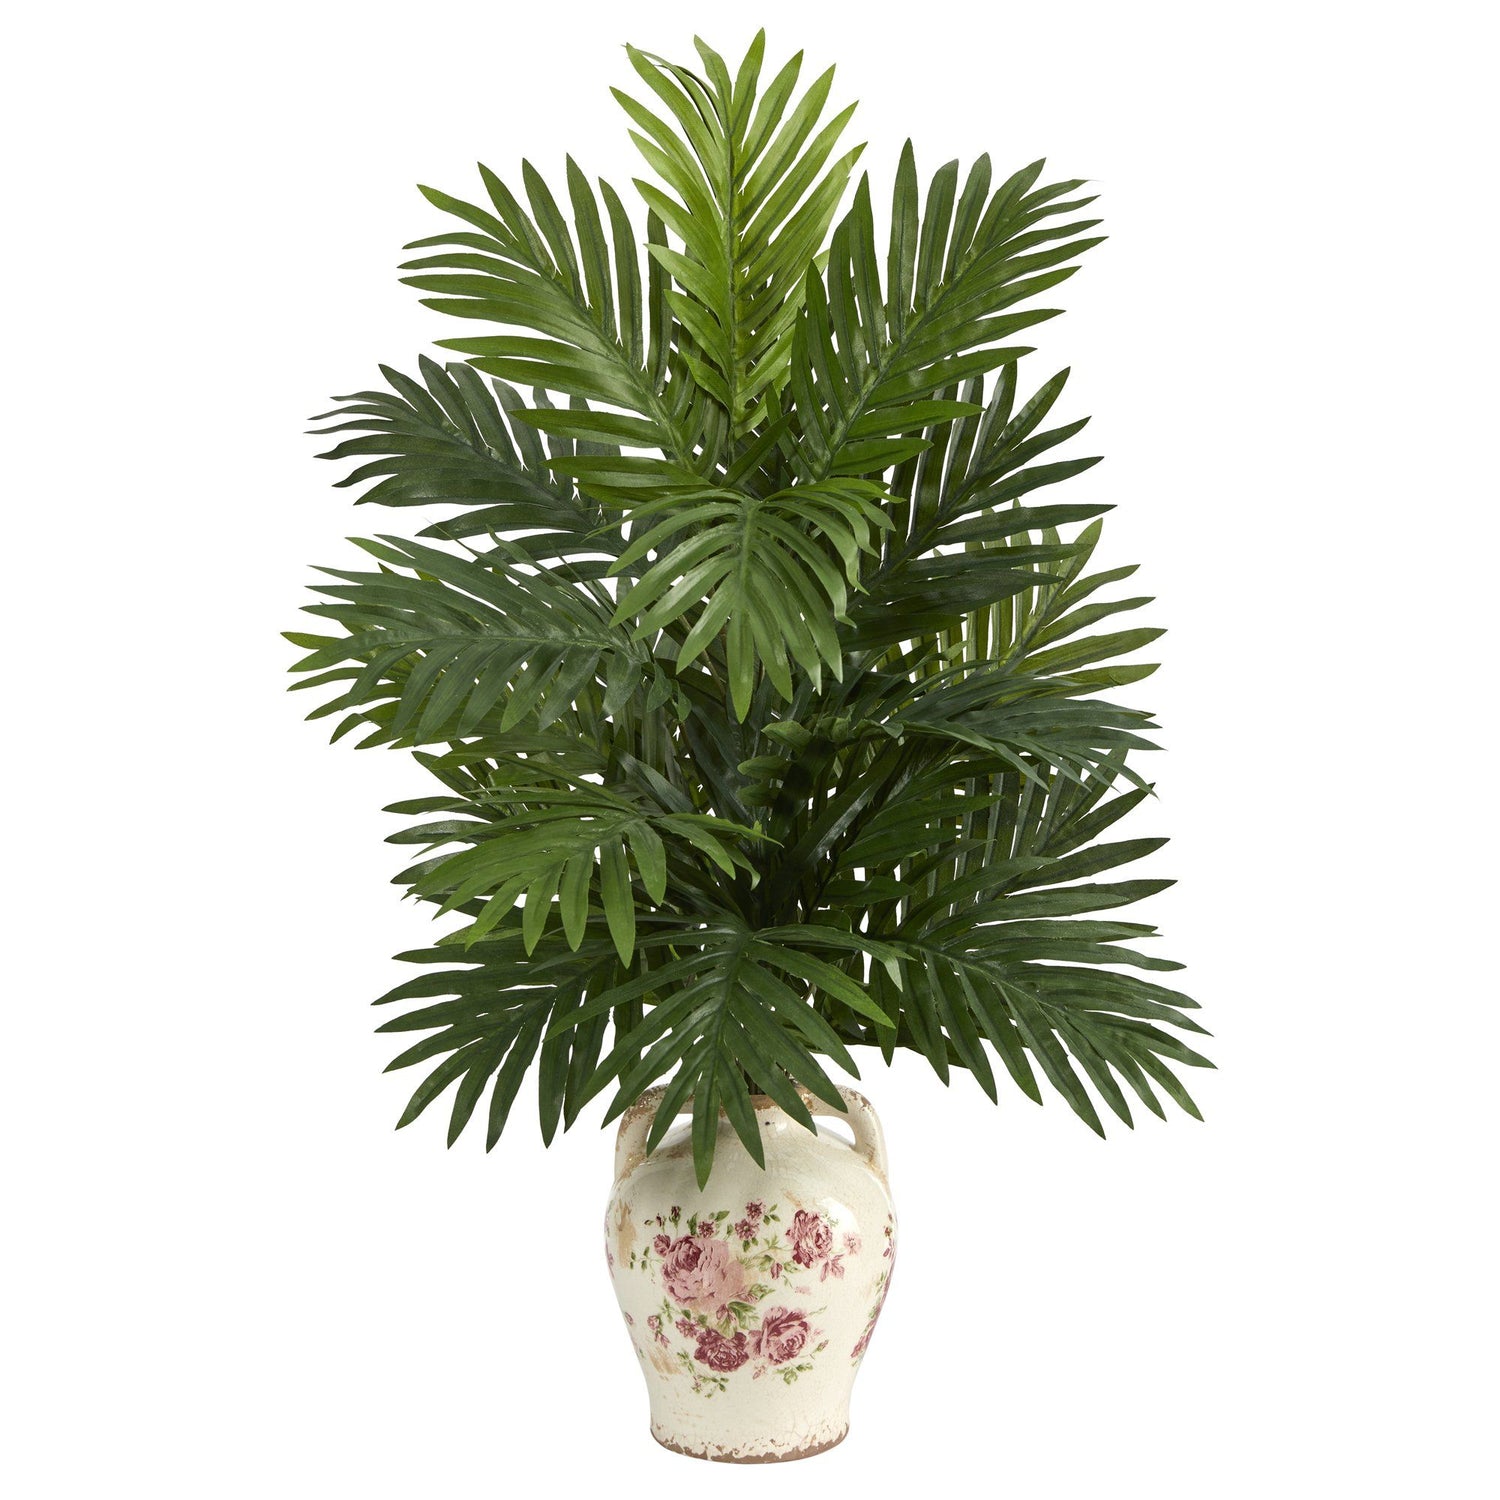 27” Areca Palm Artificial Plant in Floral Jar